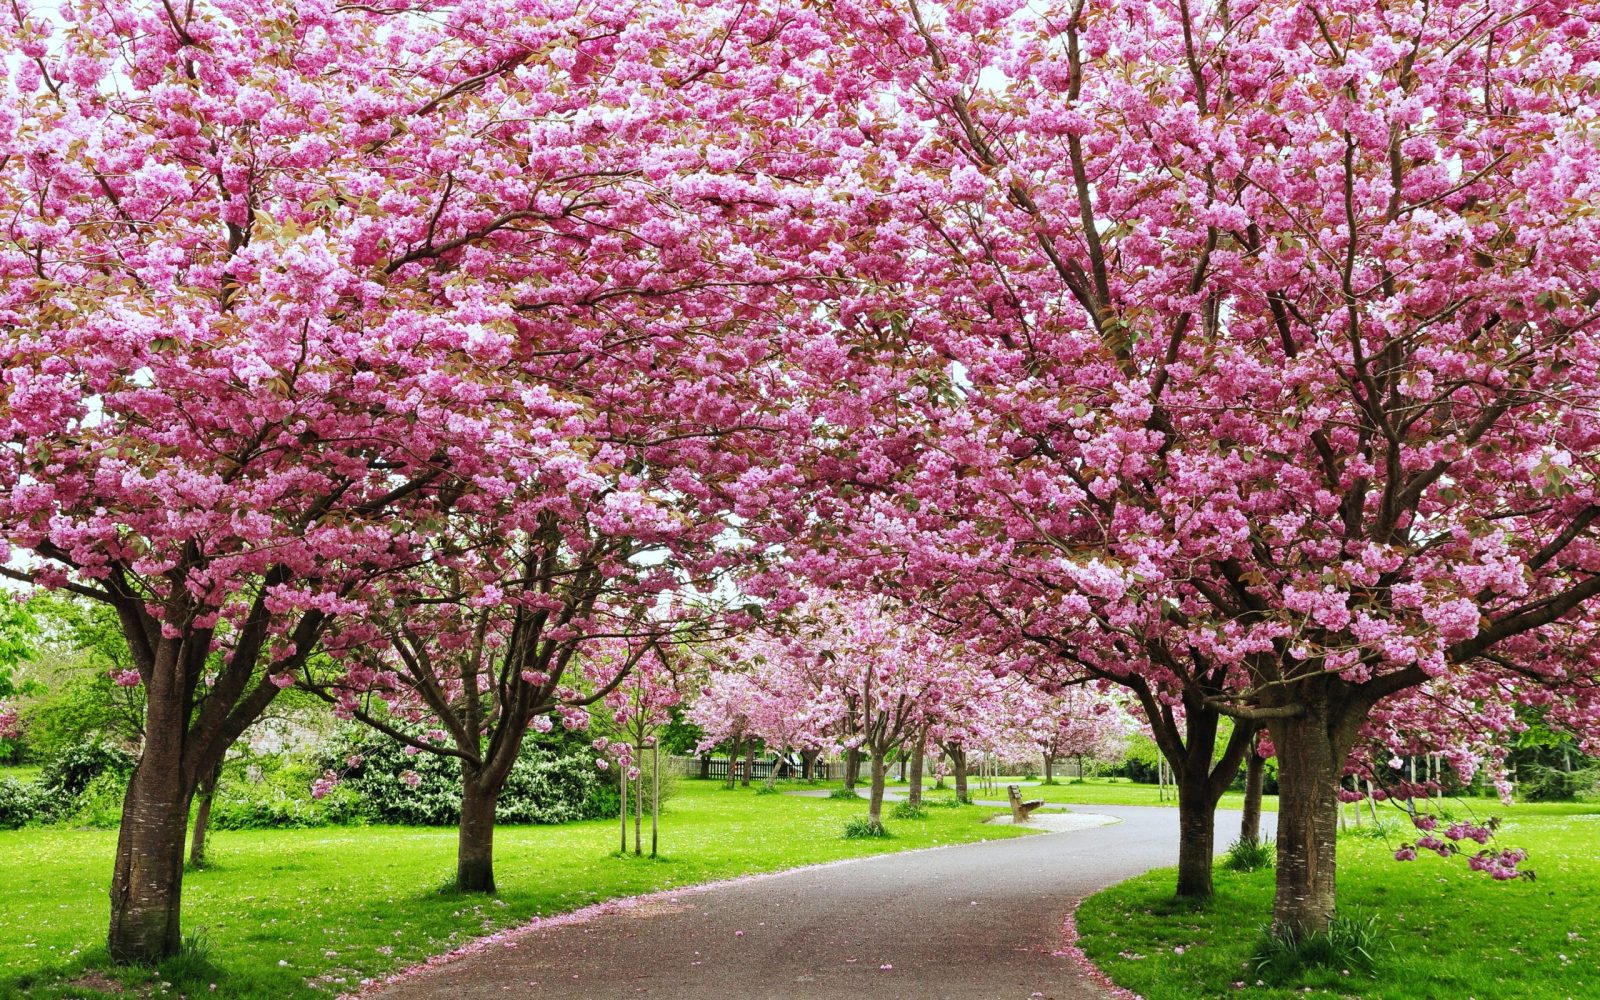 Cherry blossom trees in a park